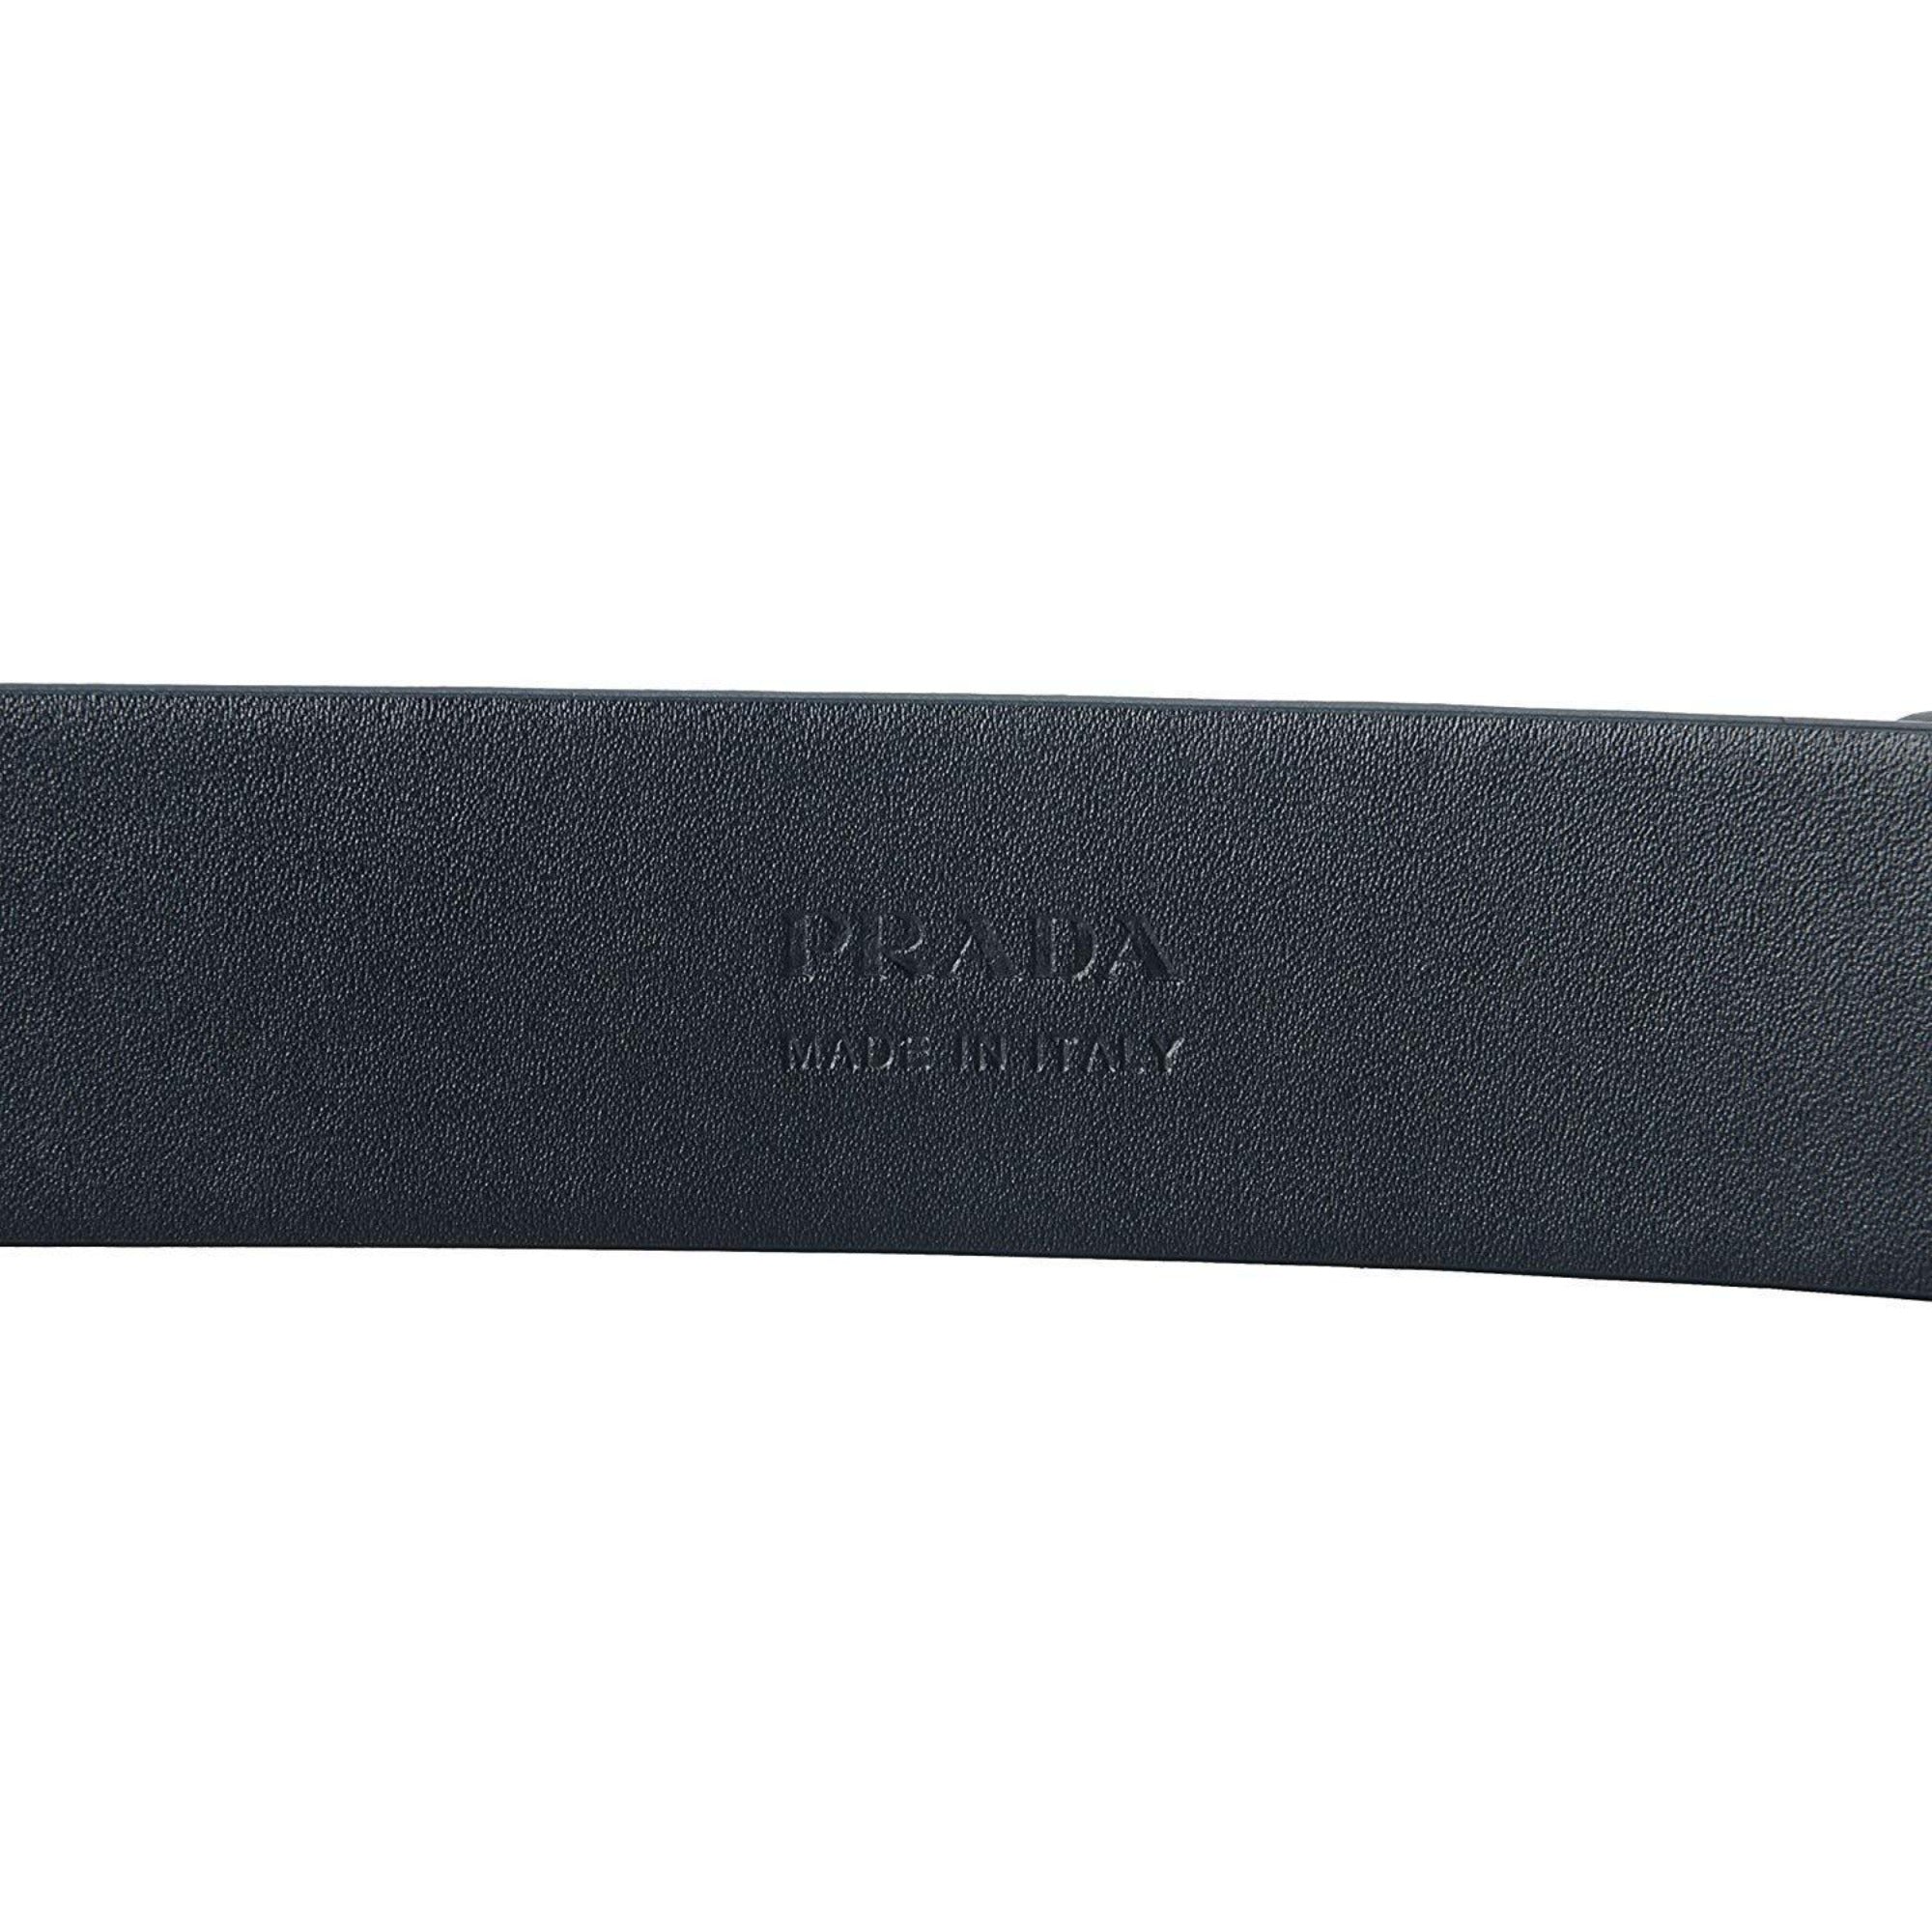 Prada Navy Blue Saffiano Leather Belt Silver Belt Buckle 2CM046 Size 100 / 40 at_Queen_Bee_of_Beverly_Hills